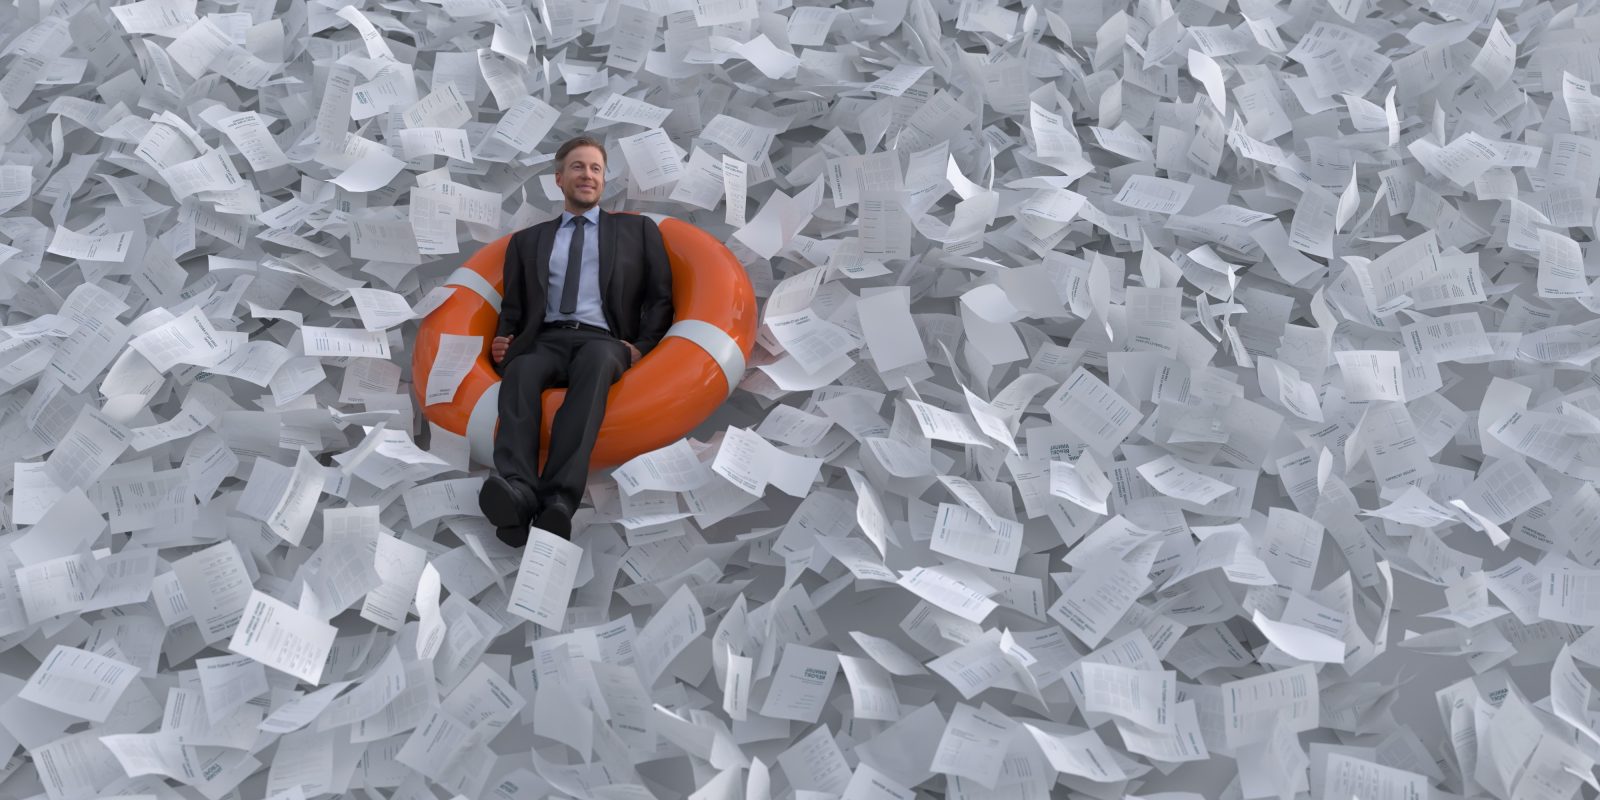 A man wearing a suit sits in a life raft in a sea of paper.